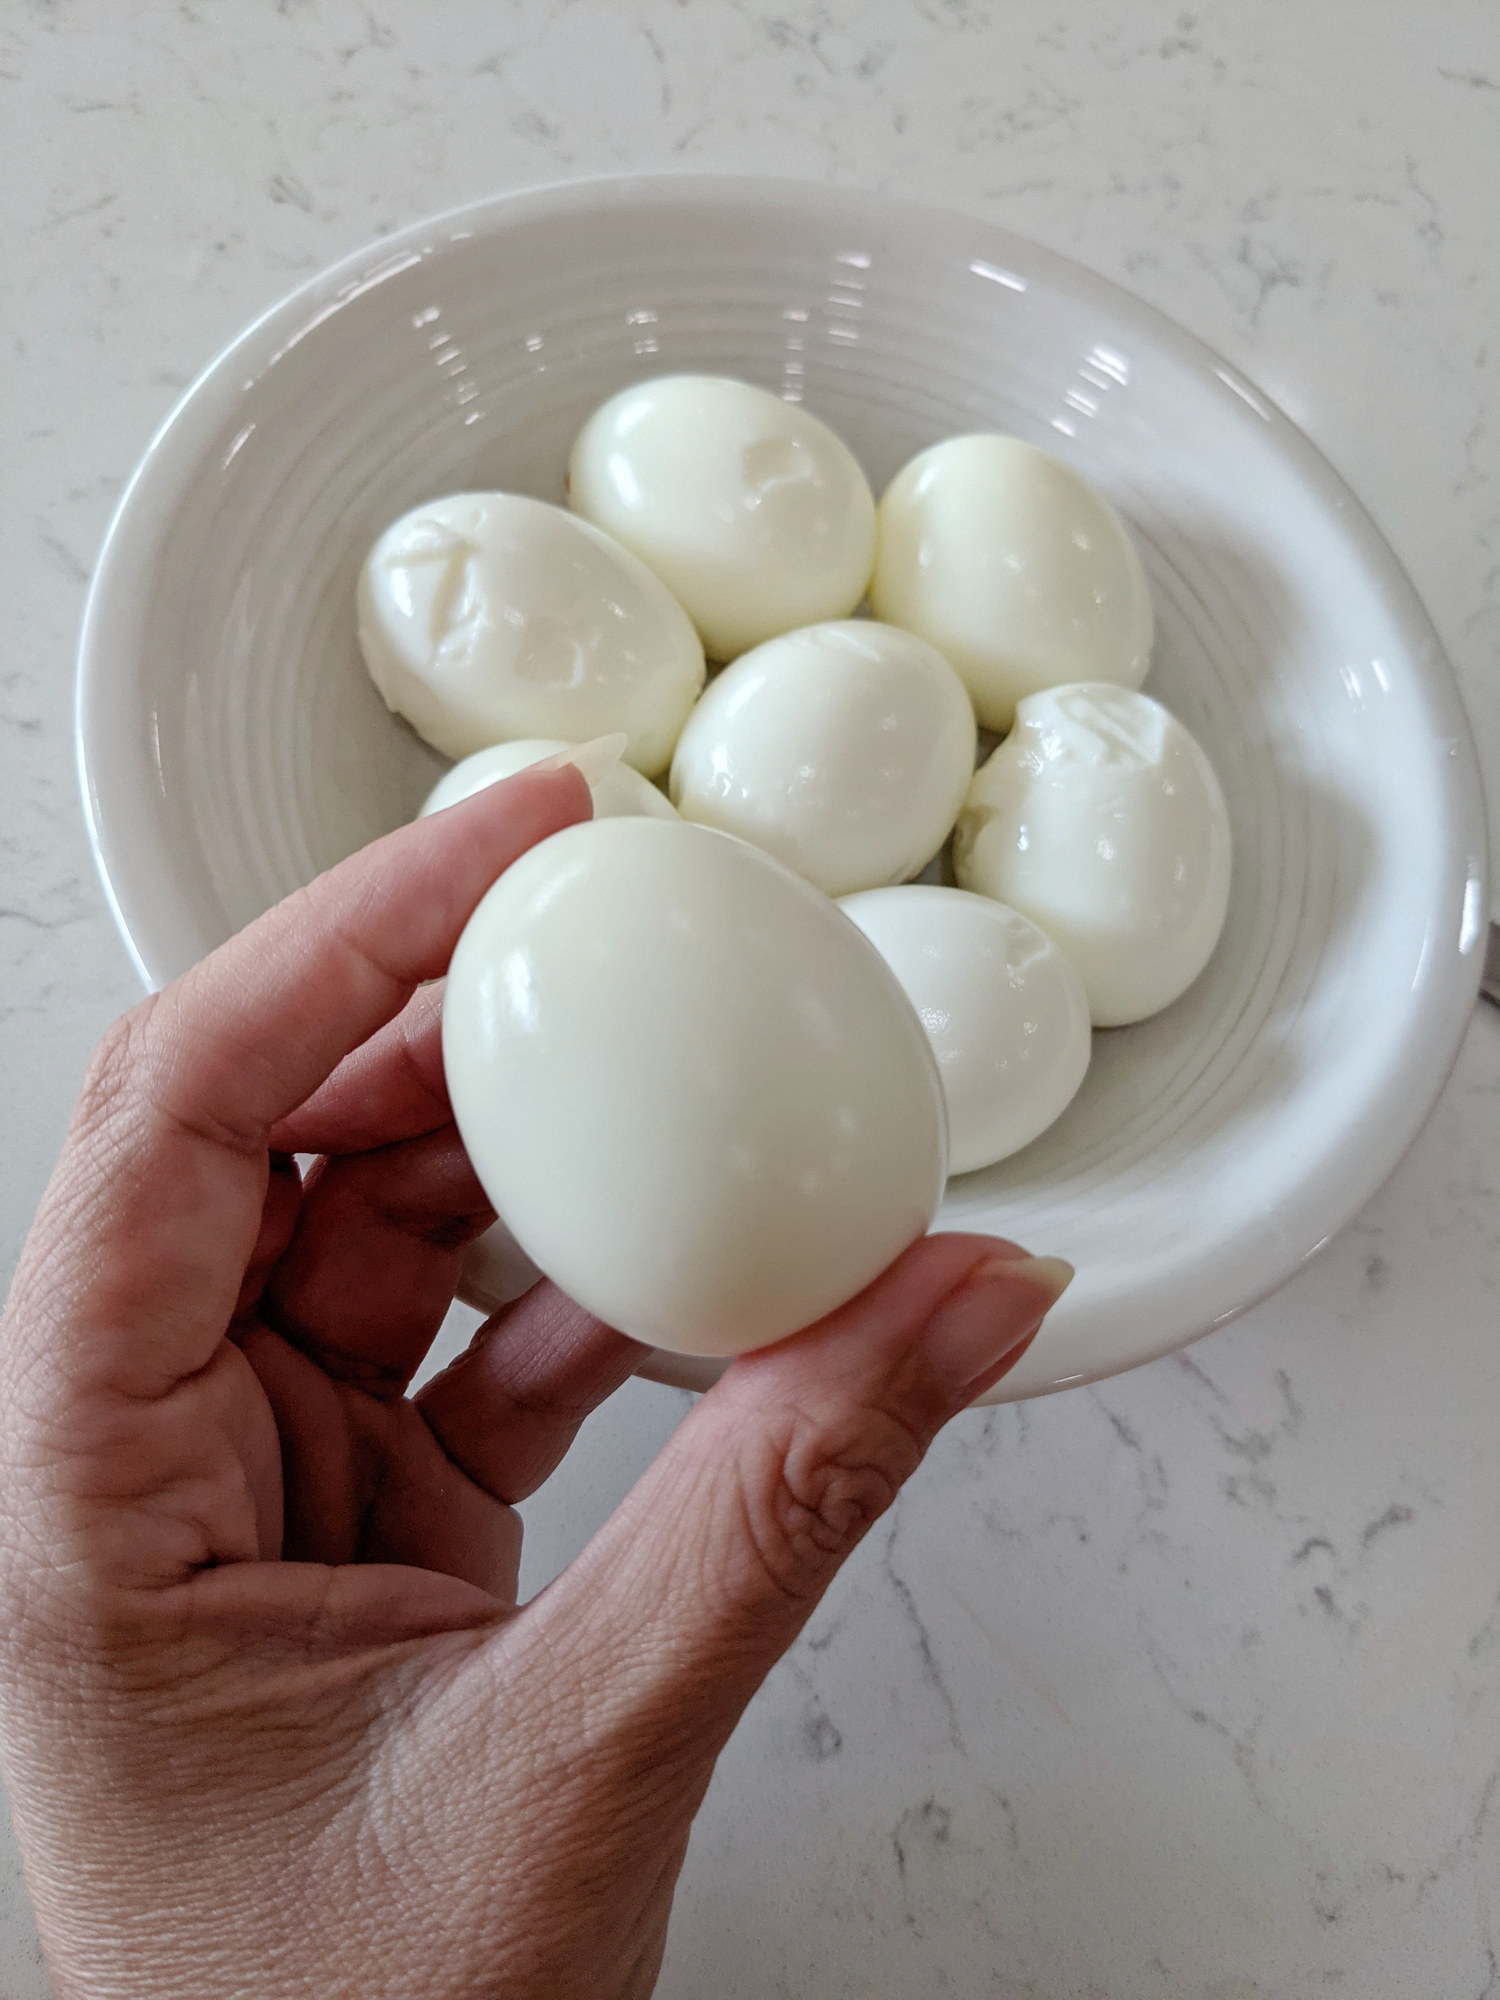 A bunch of peeled, hard boiled eggs.